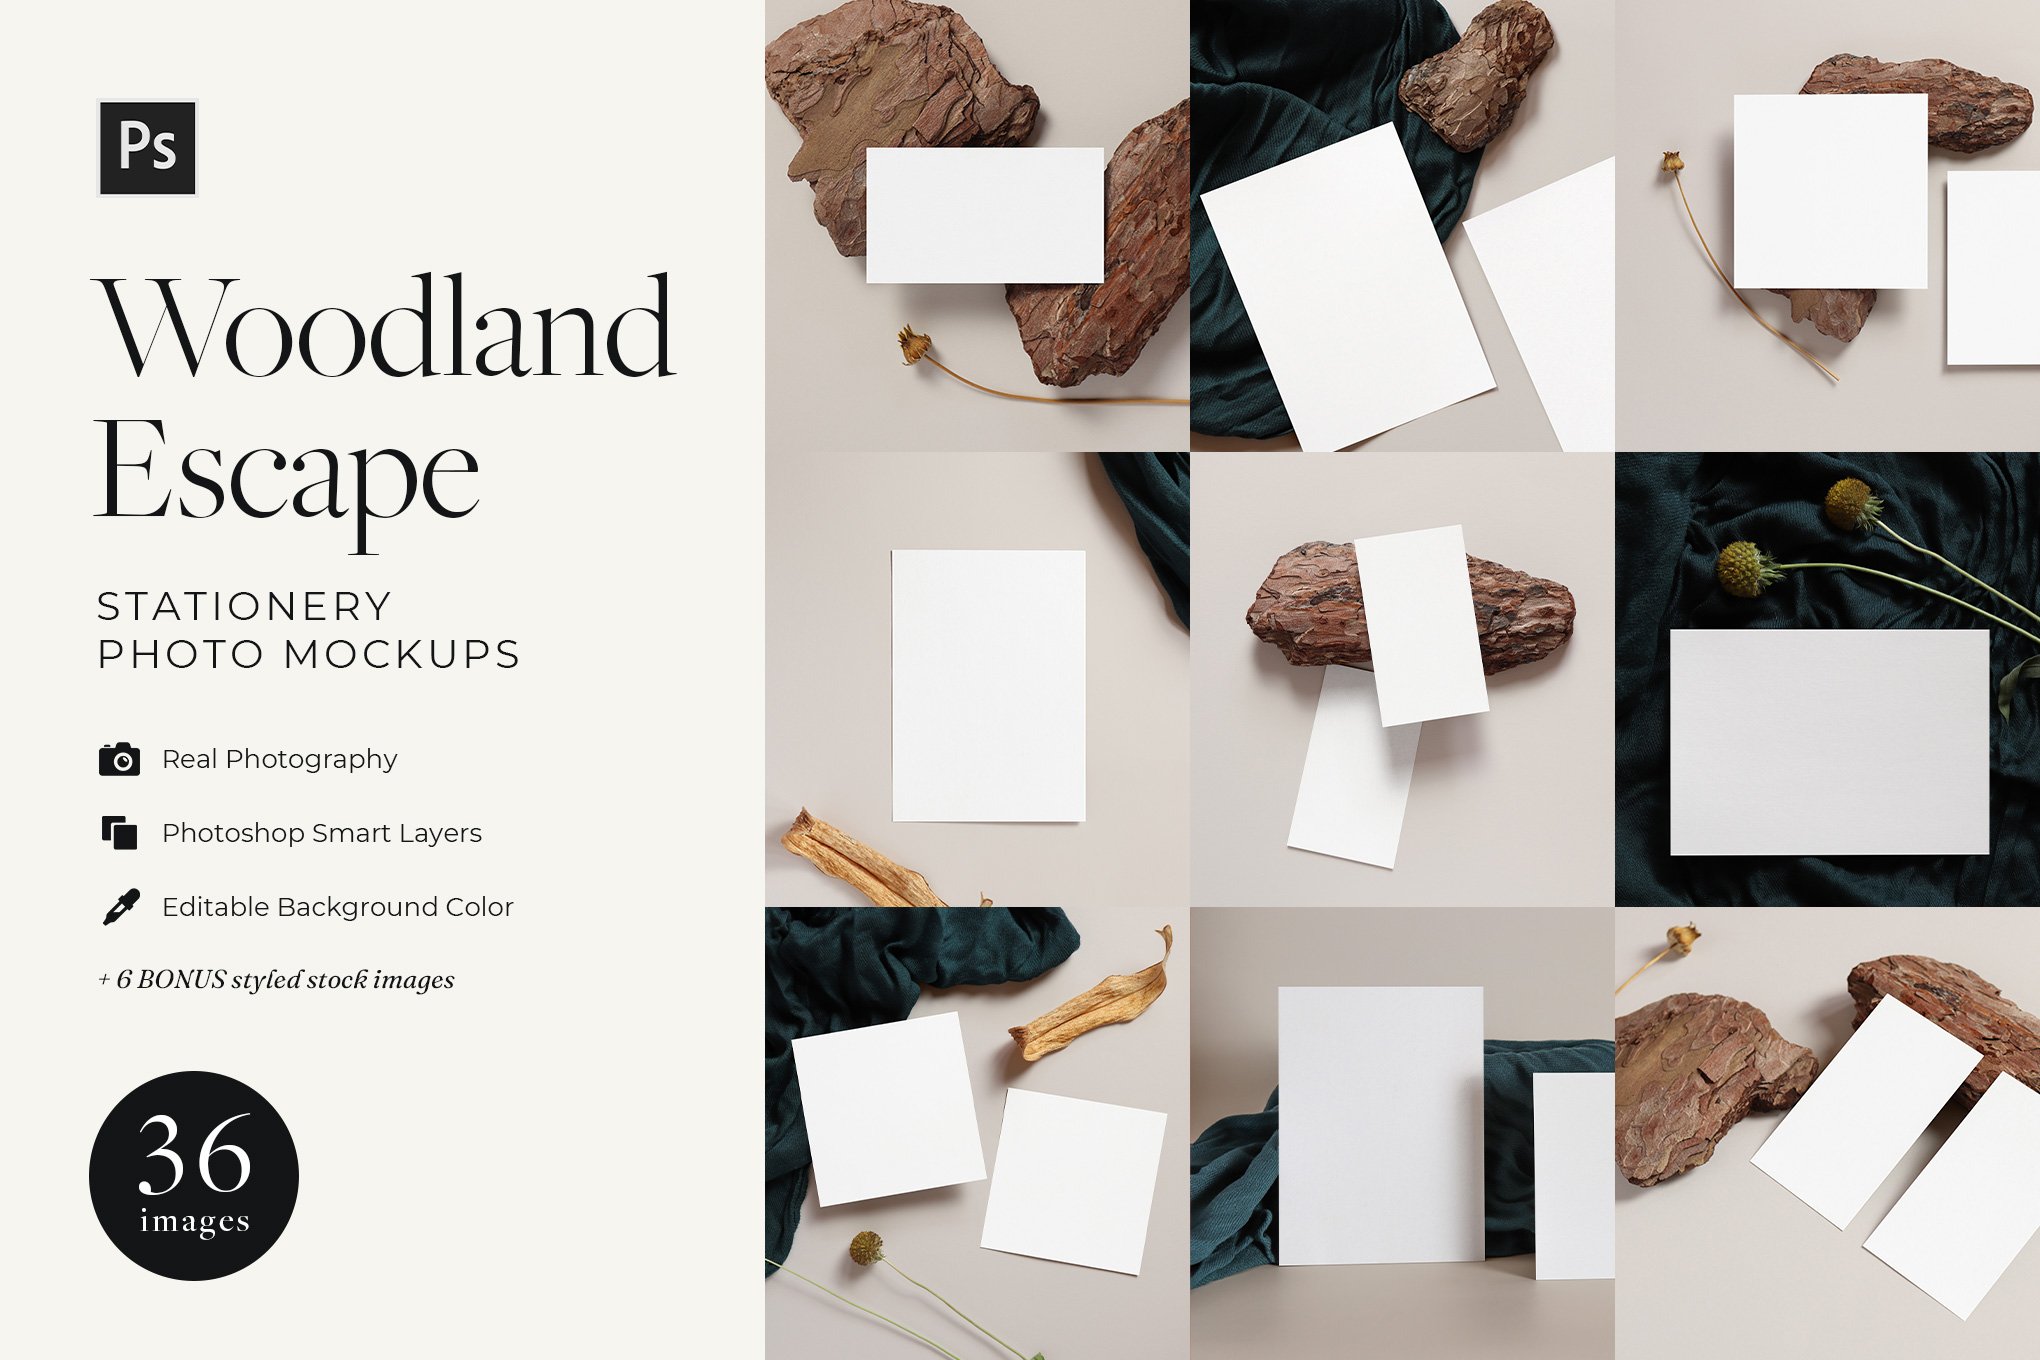 Natural Stationery Mockup Collection cover image.